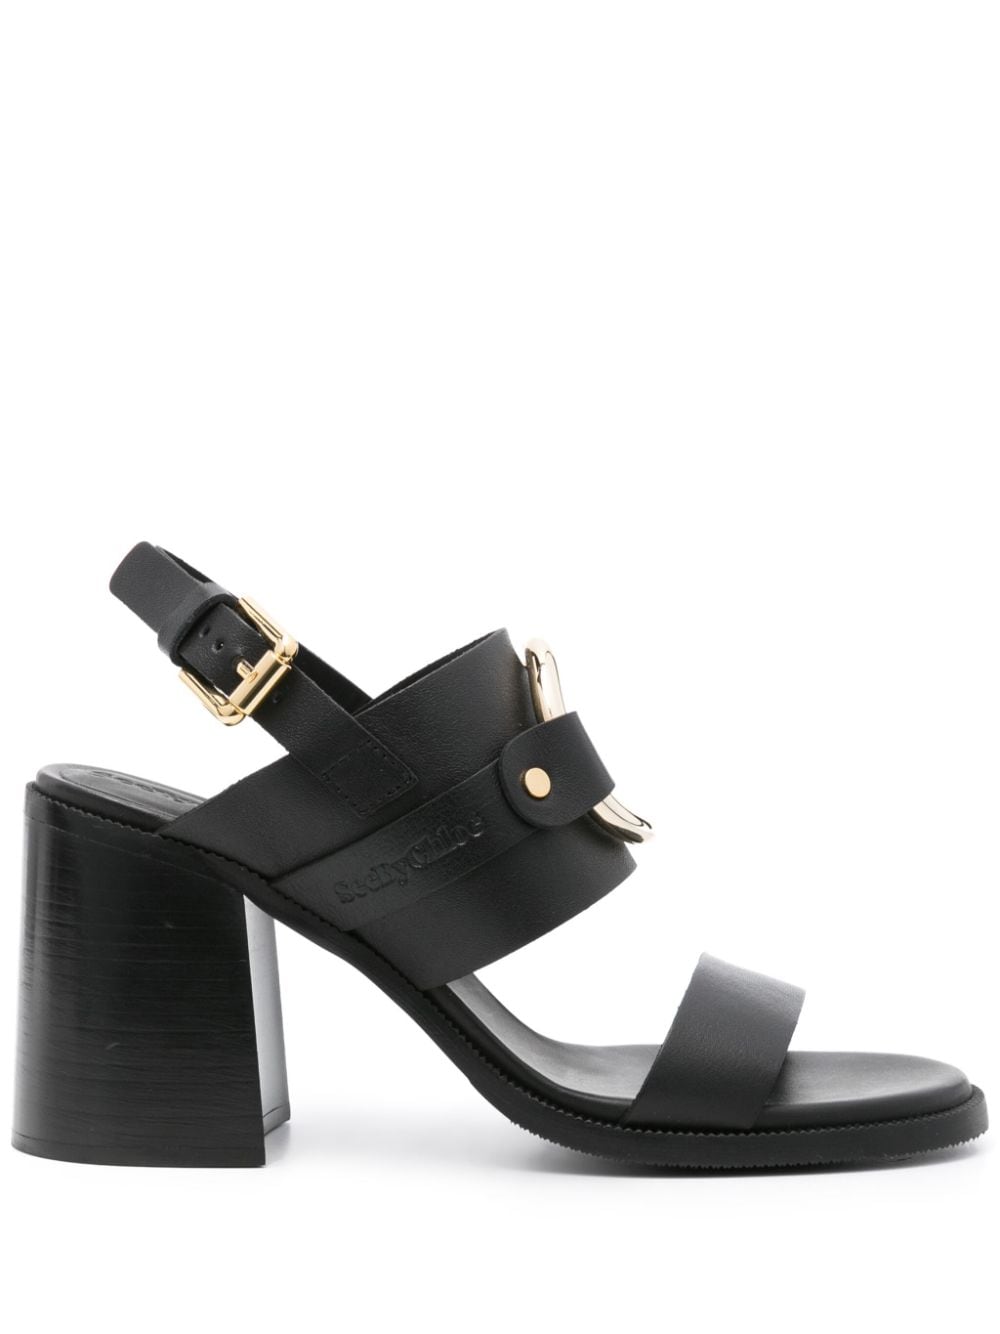 See by Chloé slingback leather sandals - Black von See by Chloé